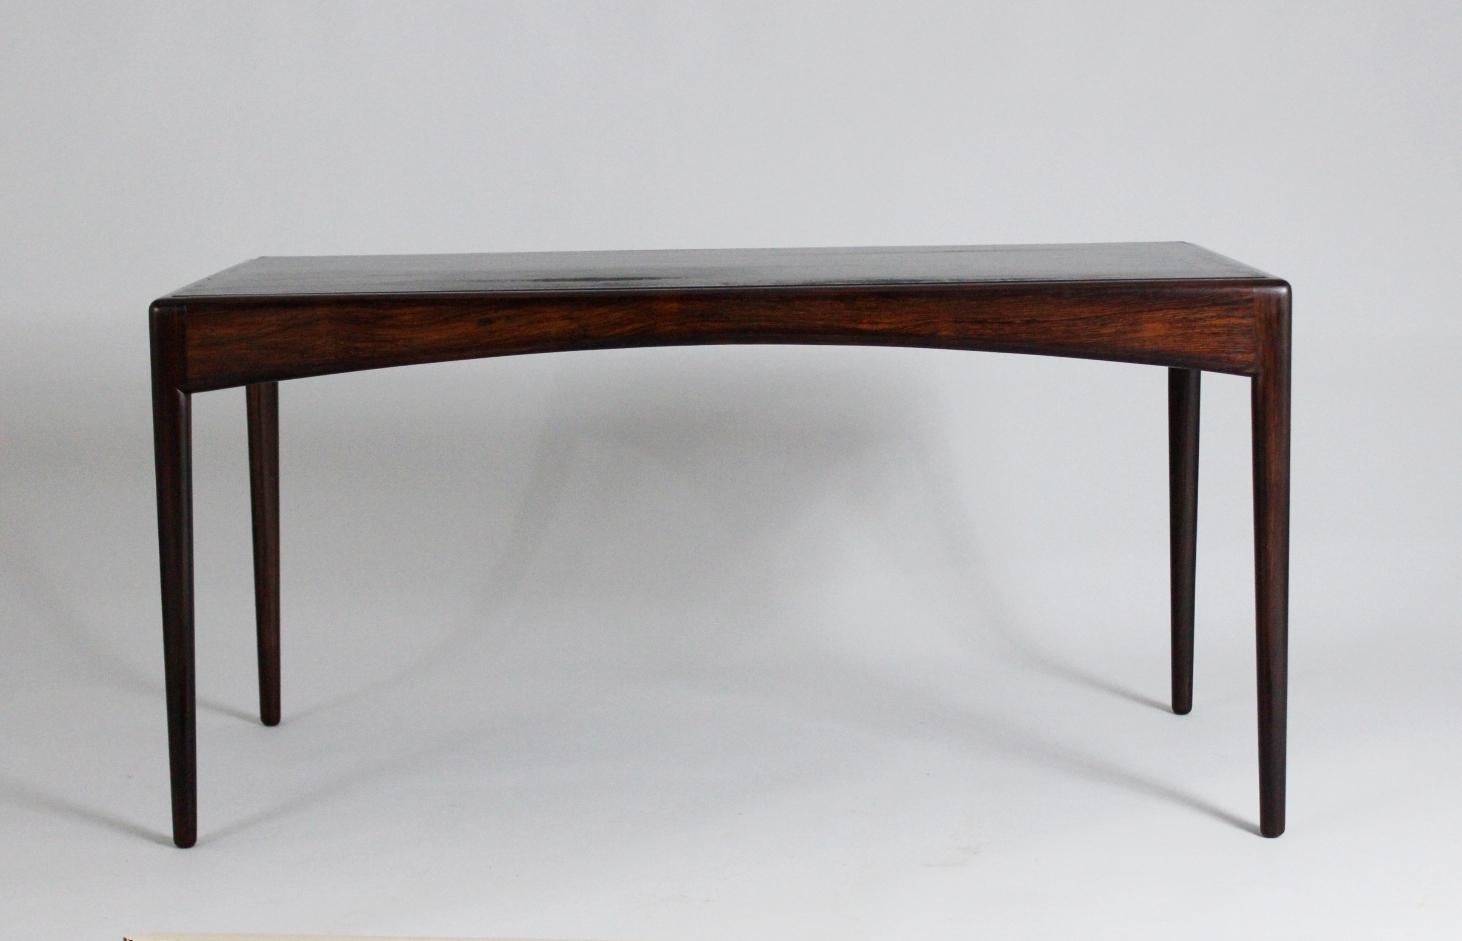 Coffee table with leather top, designed by Kristian S. Vedel in 1963. Manufactured by Søren Willadsen, Denmark. Good condition.